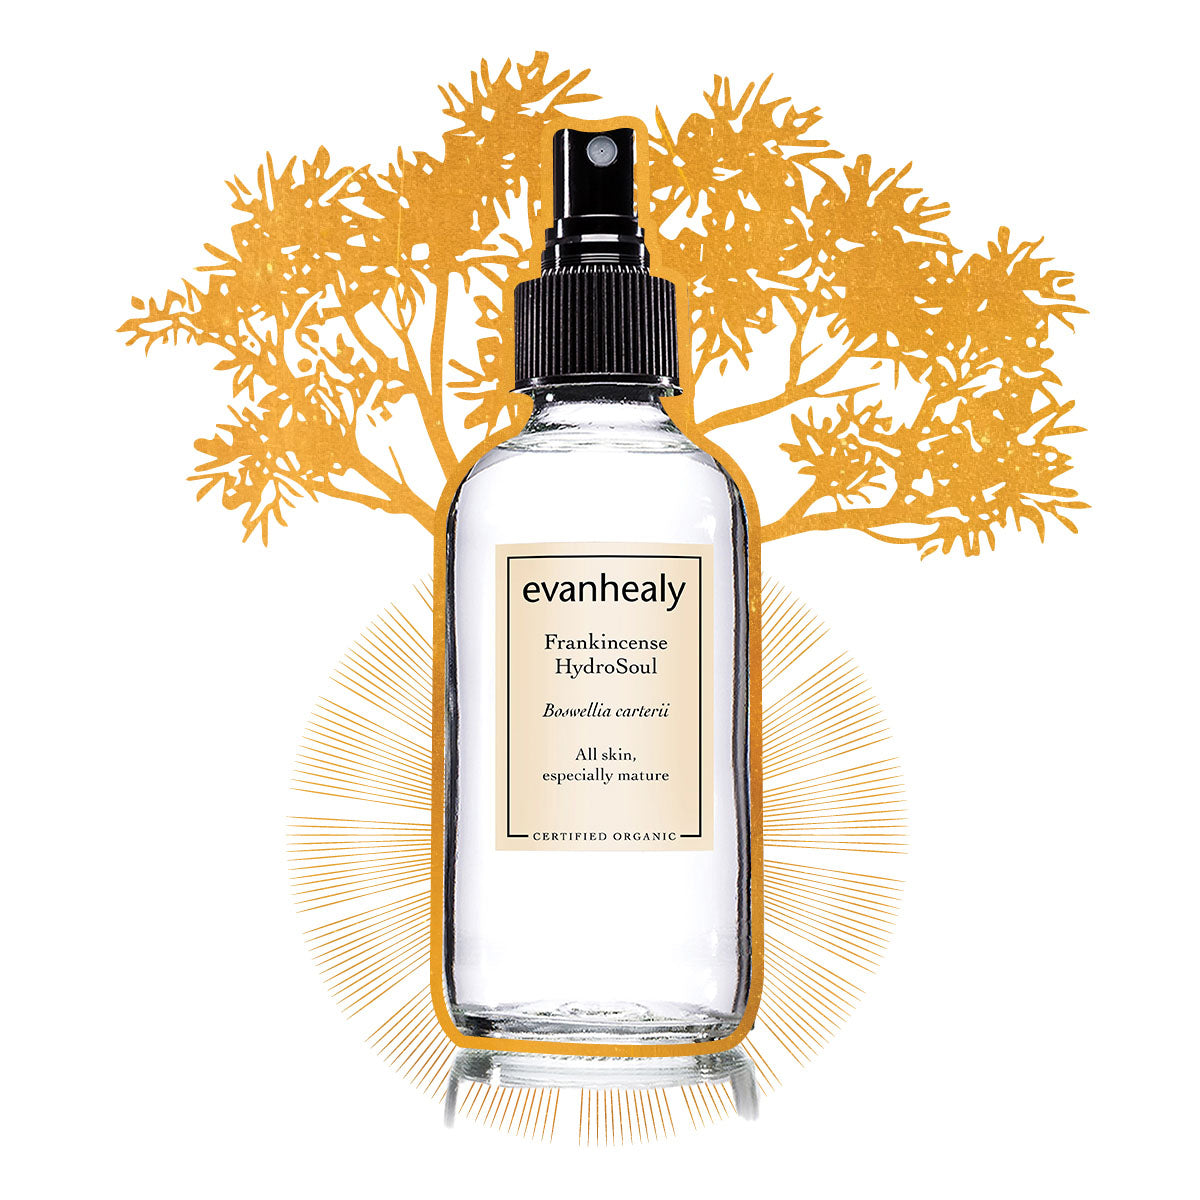 evanhealy frankincense facial tonic hydrosol gilded graphic